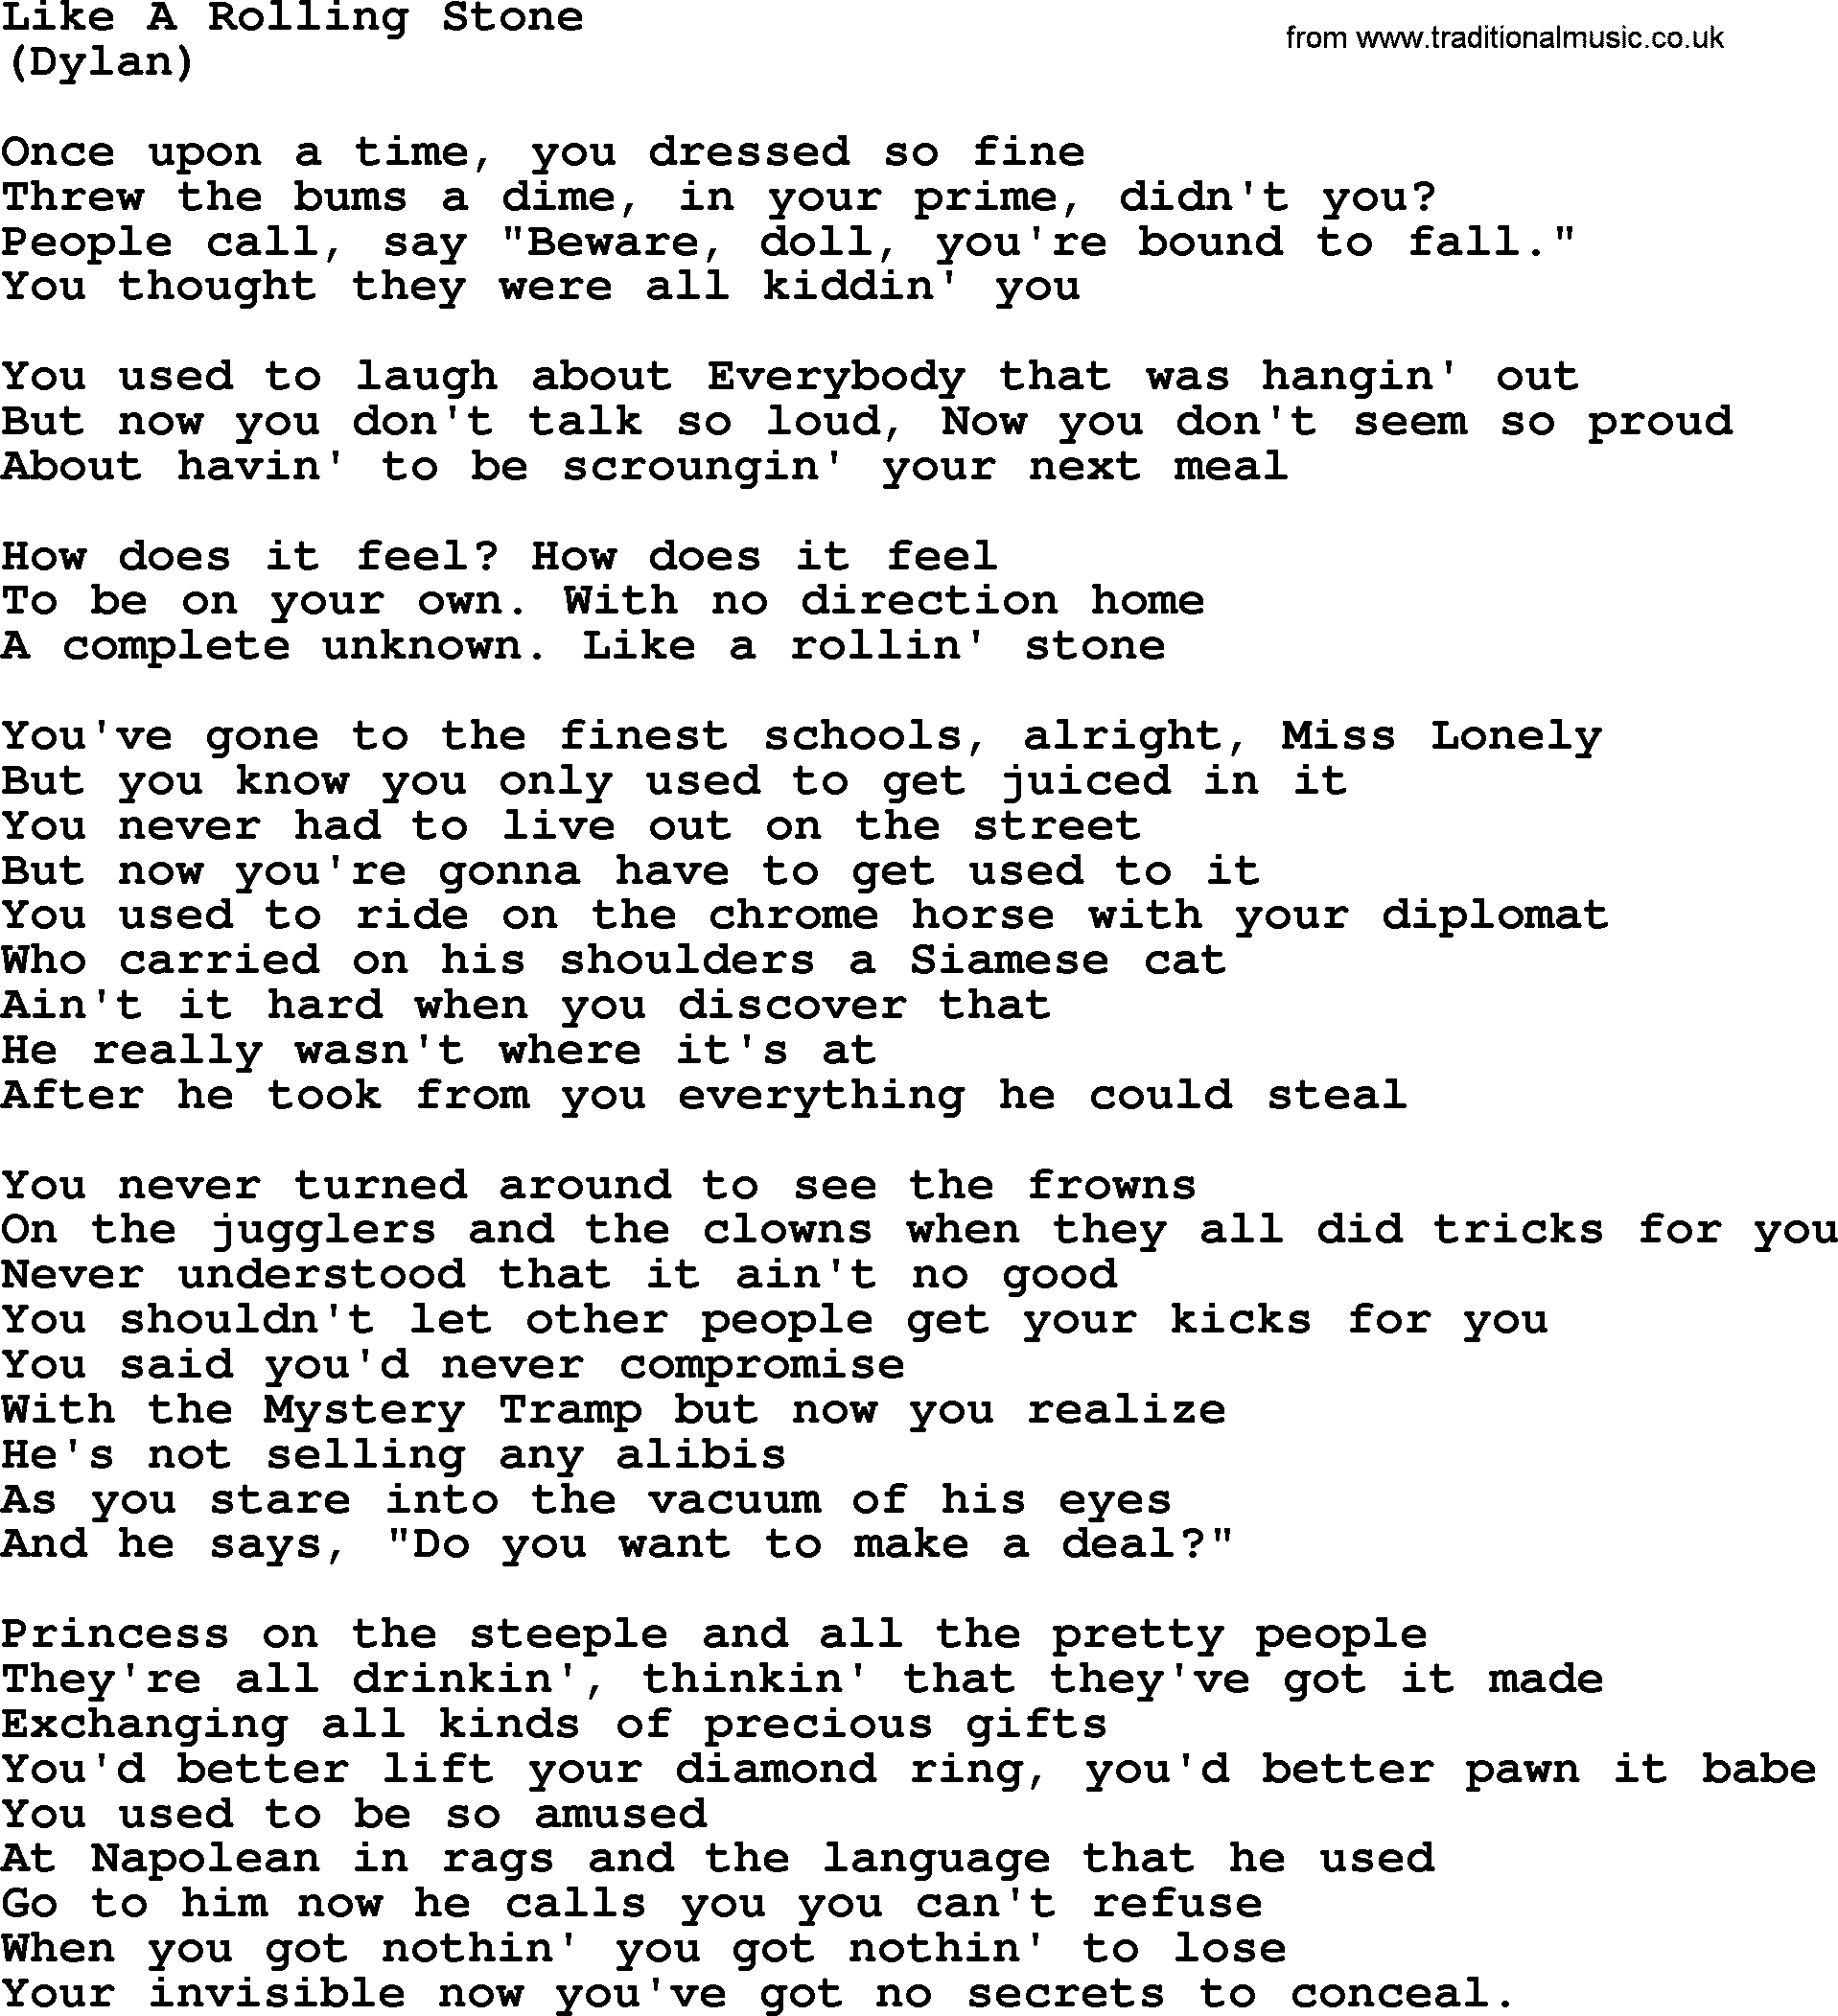 Like A Rolling Stone, by The Byrds - lyrics with pdf